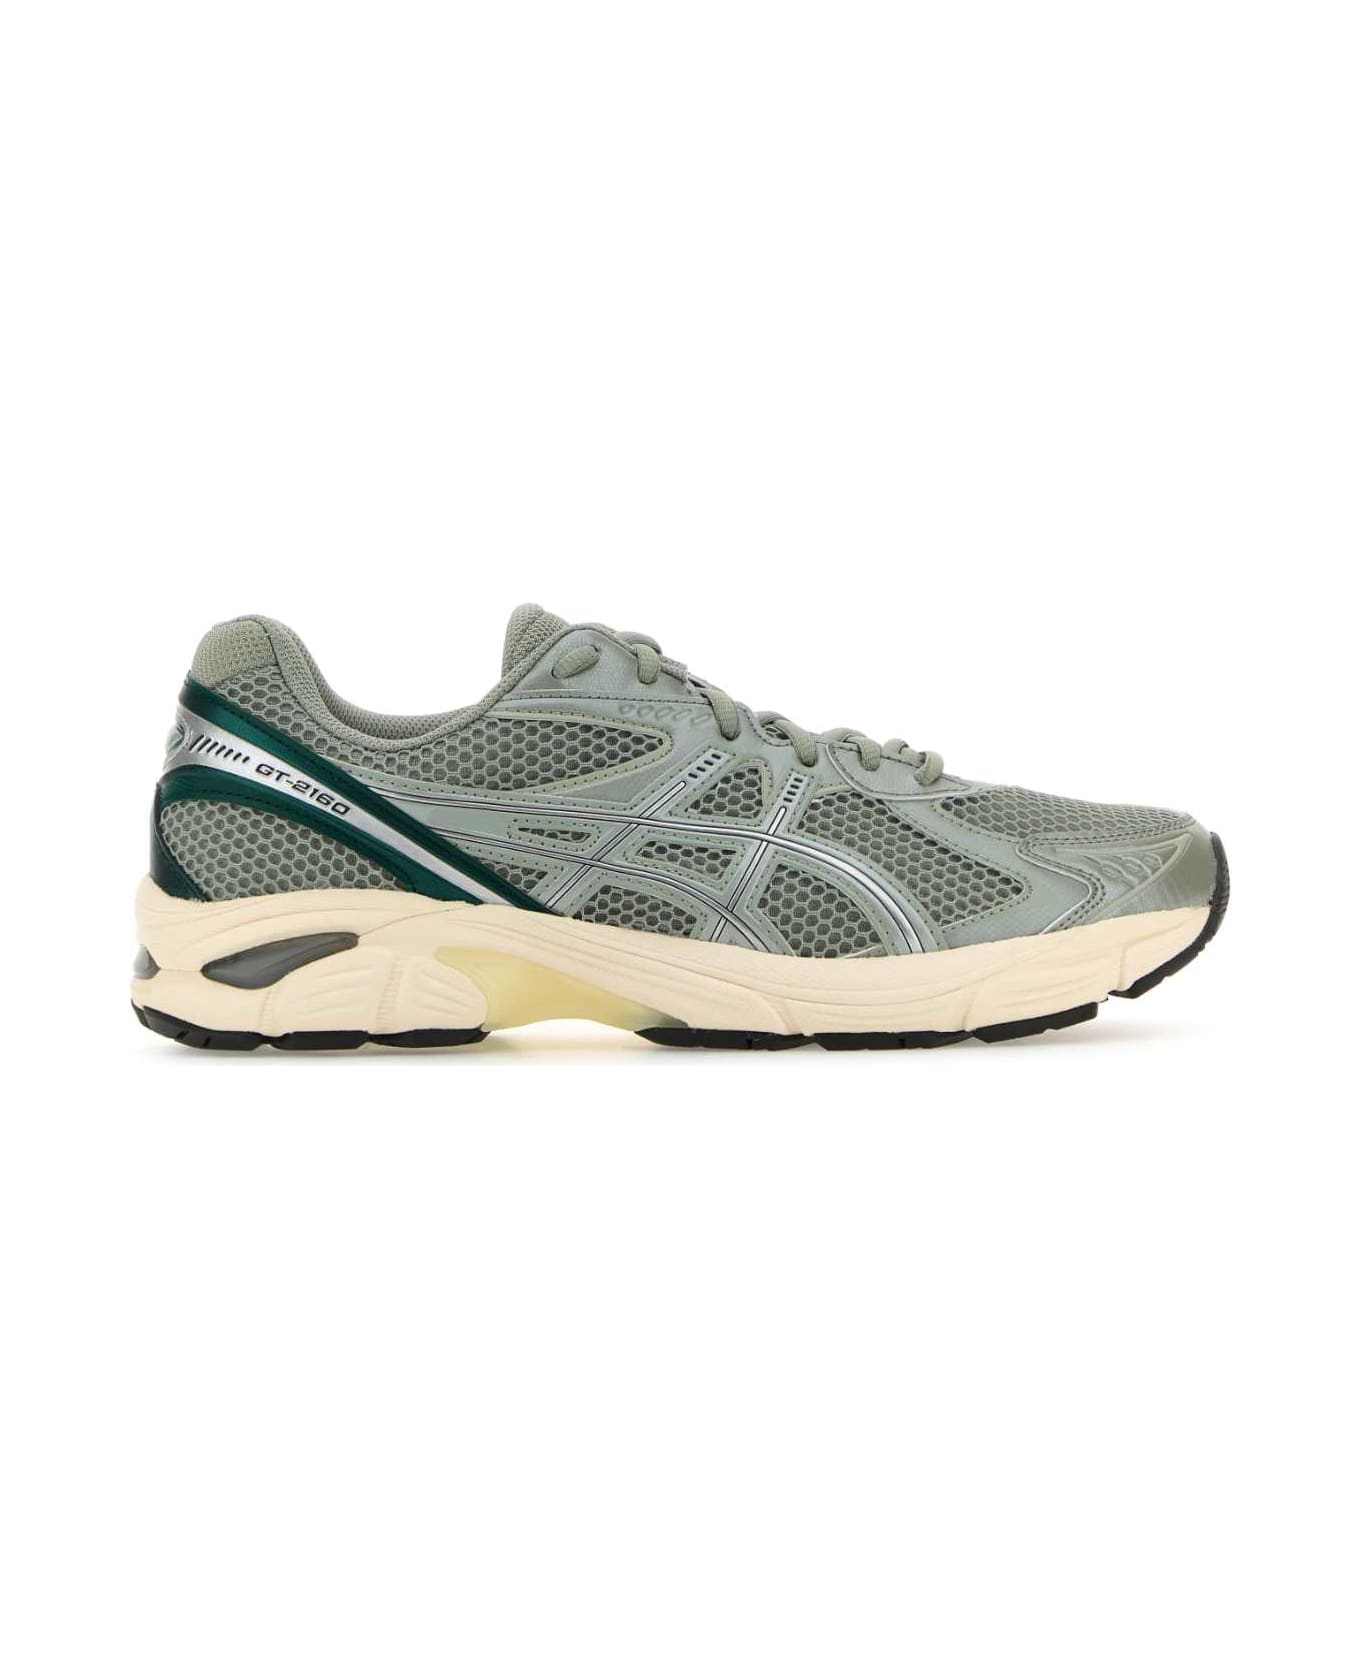 Asics Multicolor Mesh And Synthetic Leather Gt-2160 Sneakers - SEALGREYJEWELGREEN スニーカー